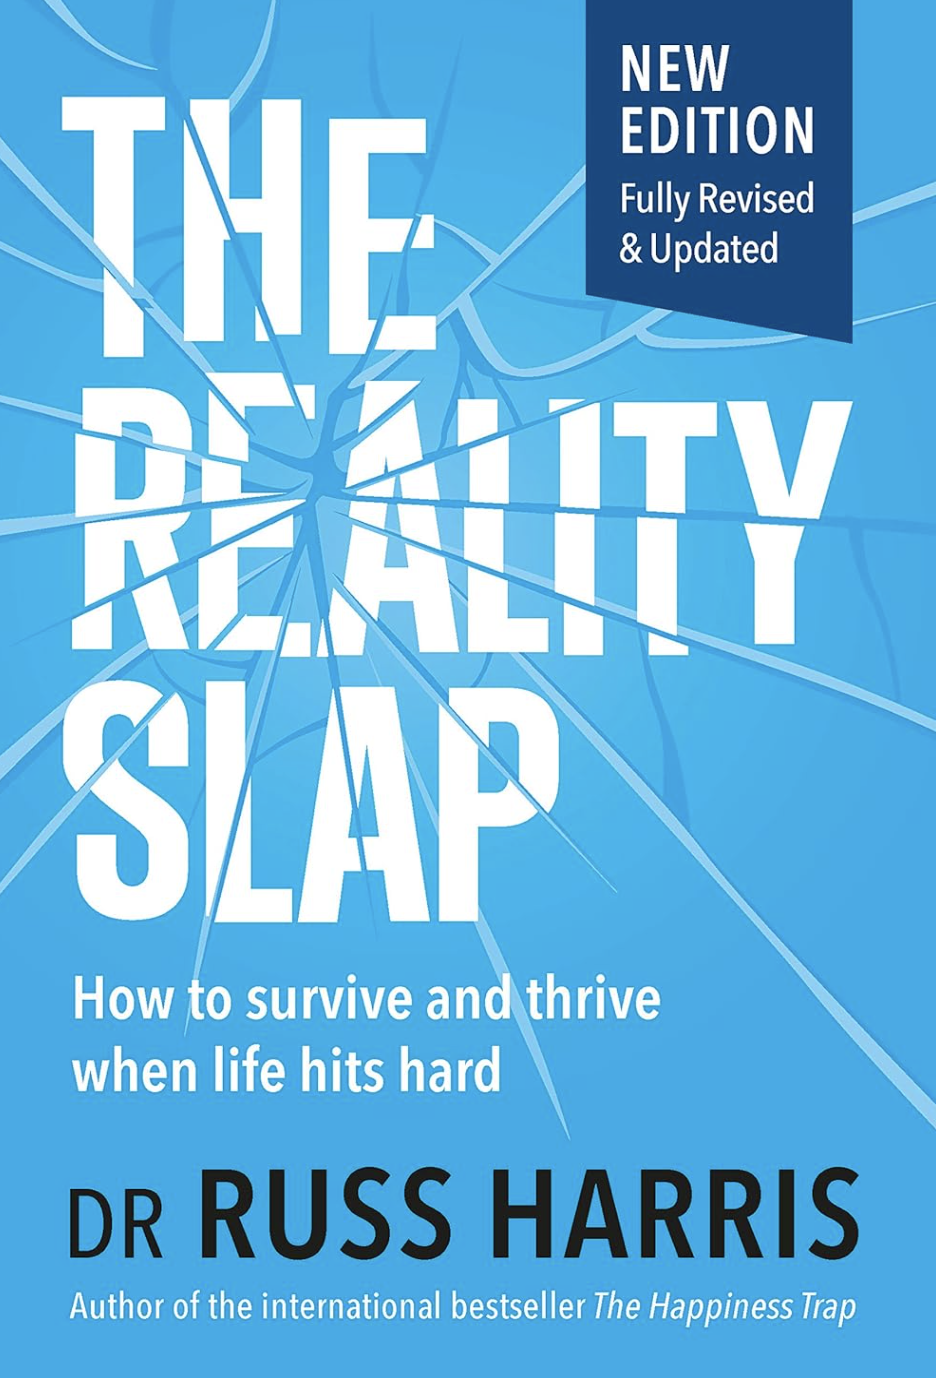 Book cover of "The Reality Slap"